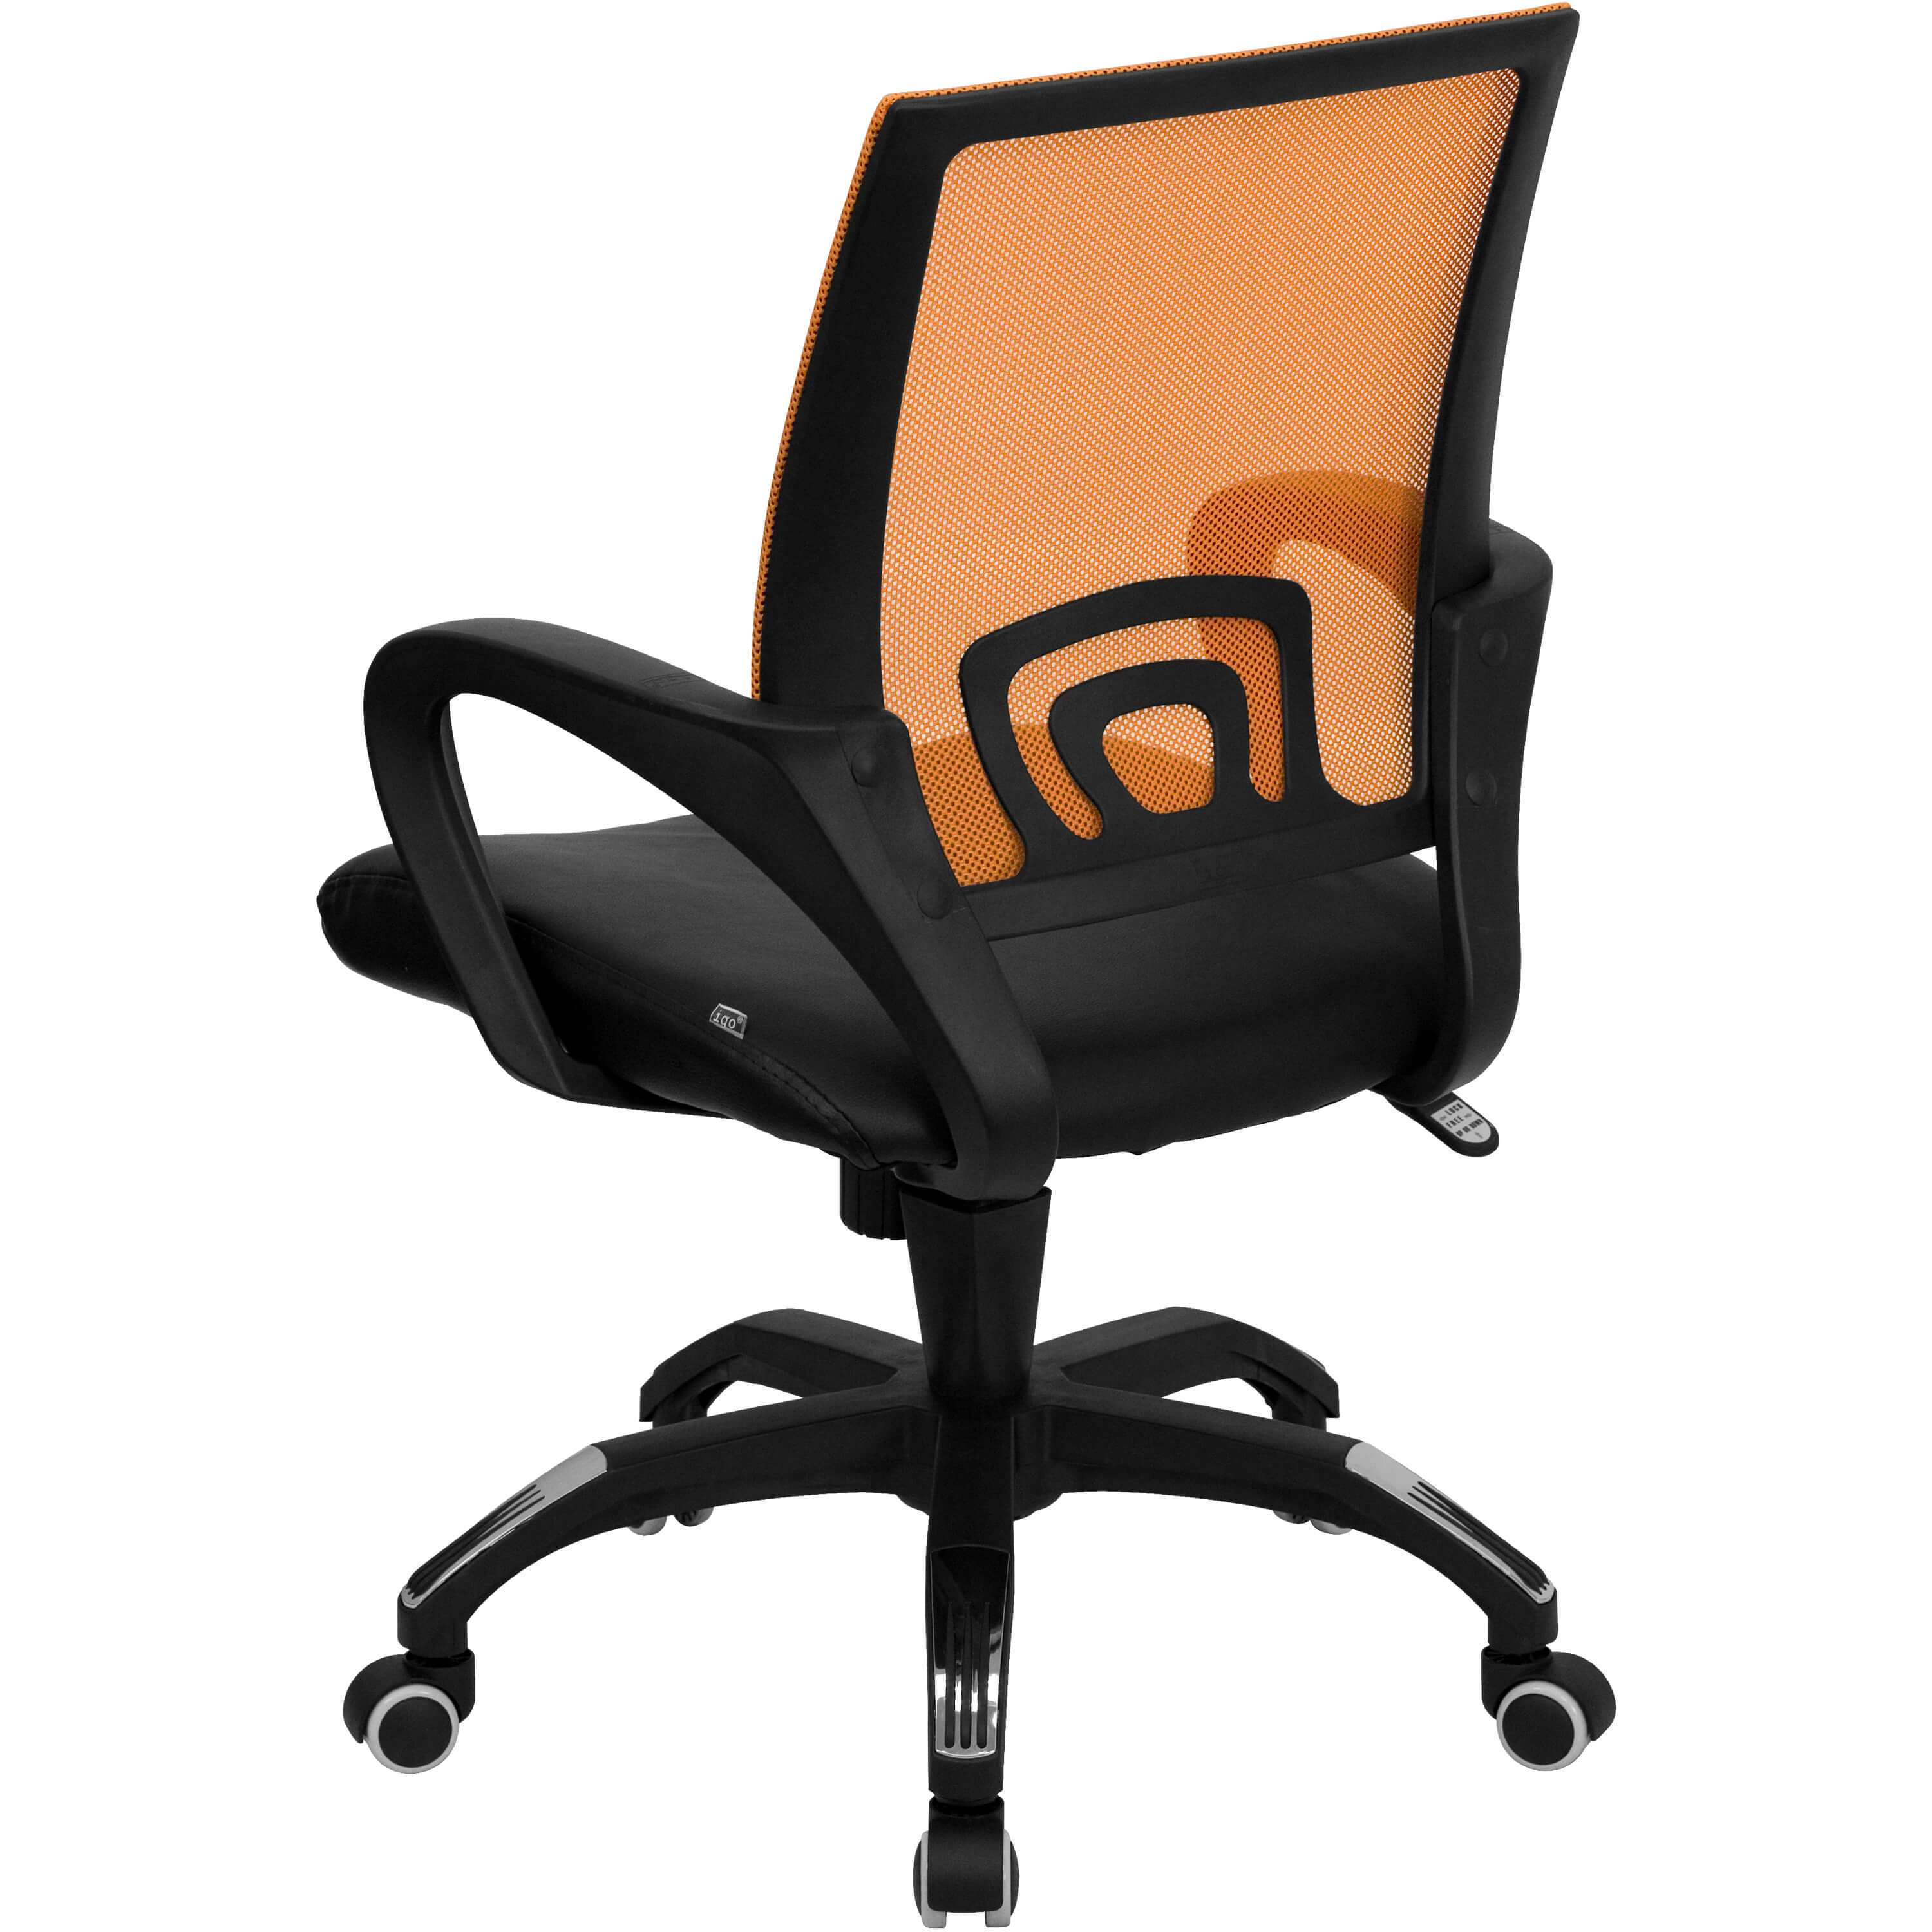 Comfortable office chair rear view